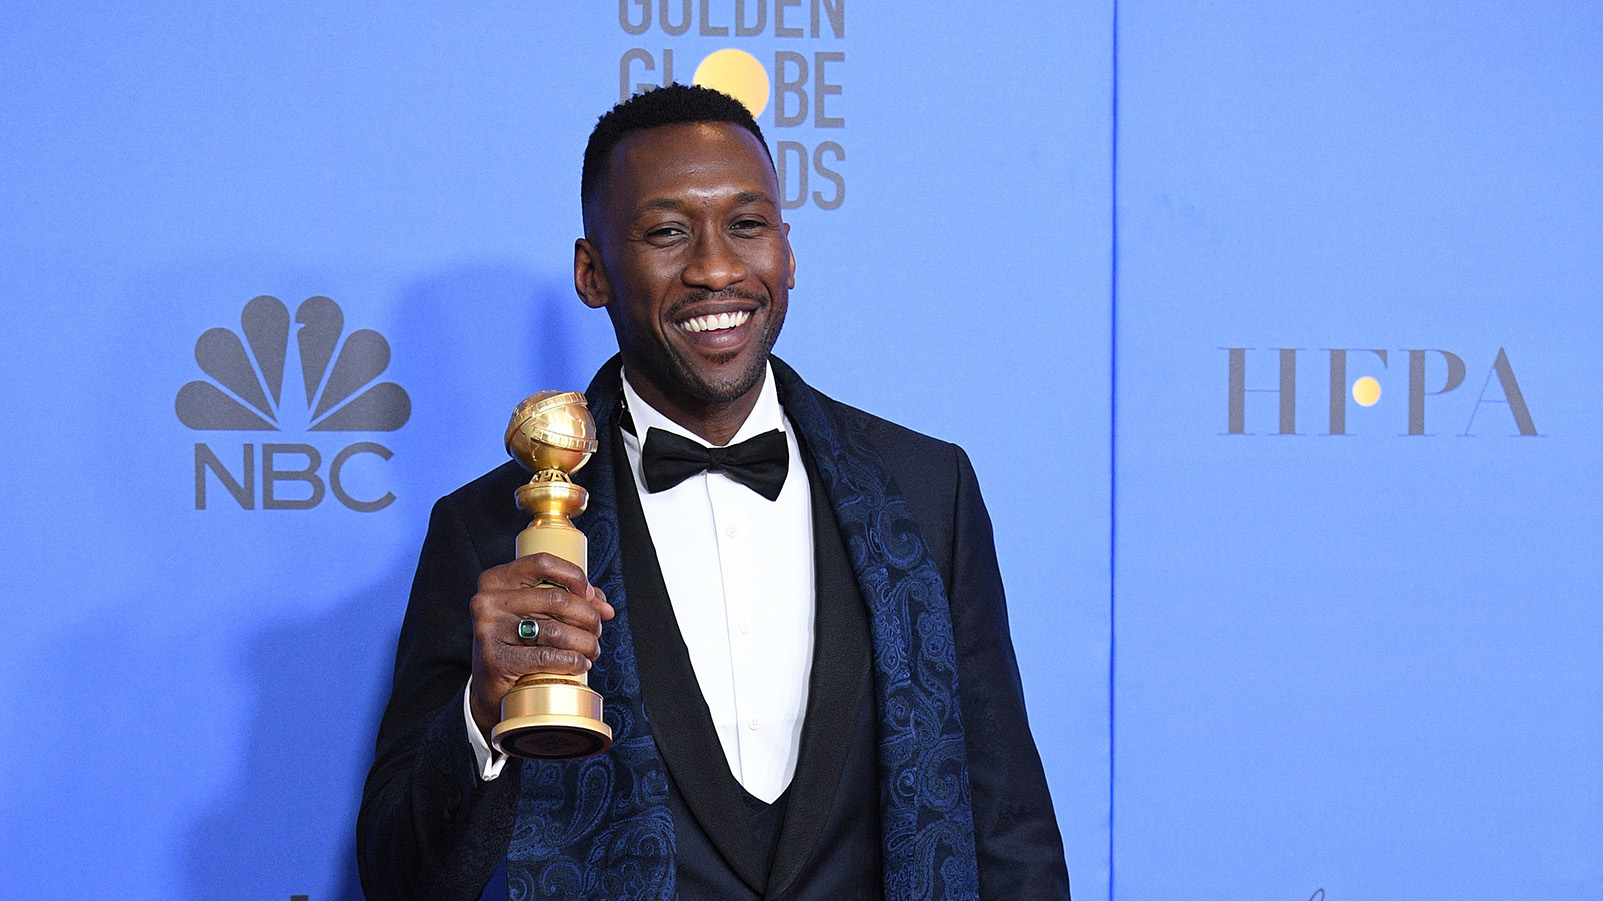 BEVERLY HILLS, CALIFORNIA - JANUARY 06: Best Actor in a Supporting Role in any Motion Picture for 'The Green Book' winner Mahershala Ali poses in the press room during the 75th Annual Golden Globe Awards at The Beverly Hilton Hotel on January 06, 2019 in Beverly Hills, California. (Photo by Daniele Venturelli/WireImage) (Daniele Venturelli—WireImage)